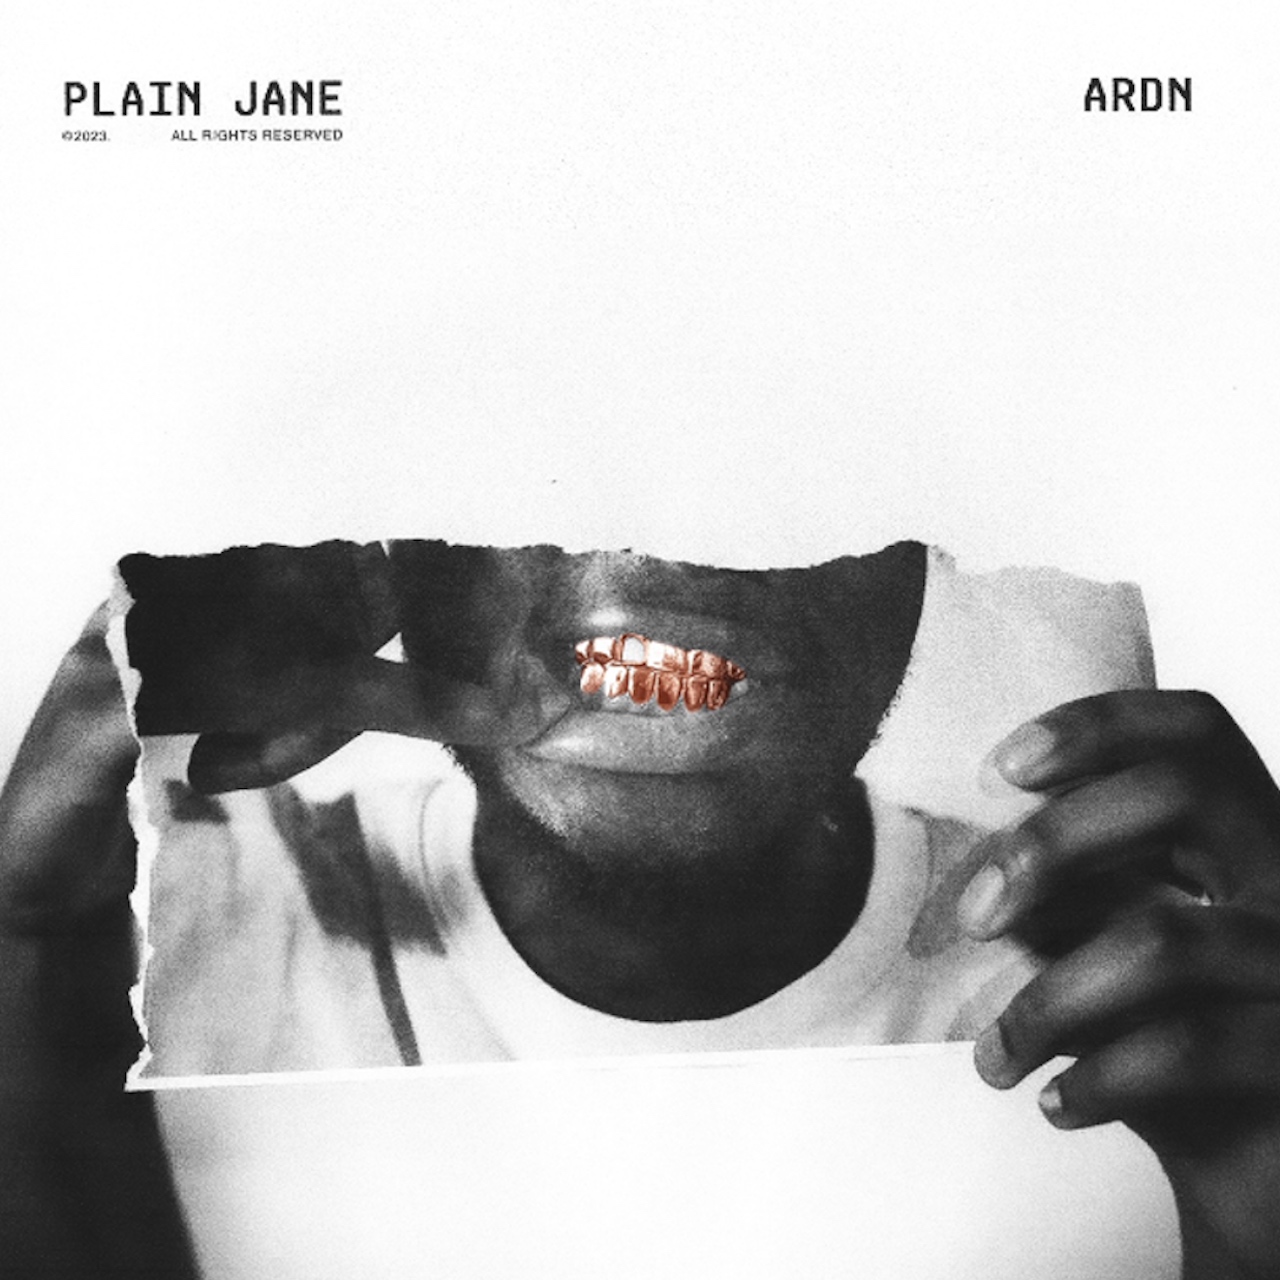 ARDN Signs To Capitol Records, Shares 'Plain Jane